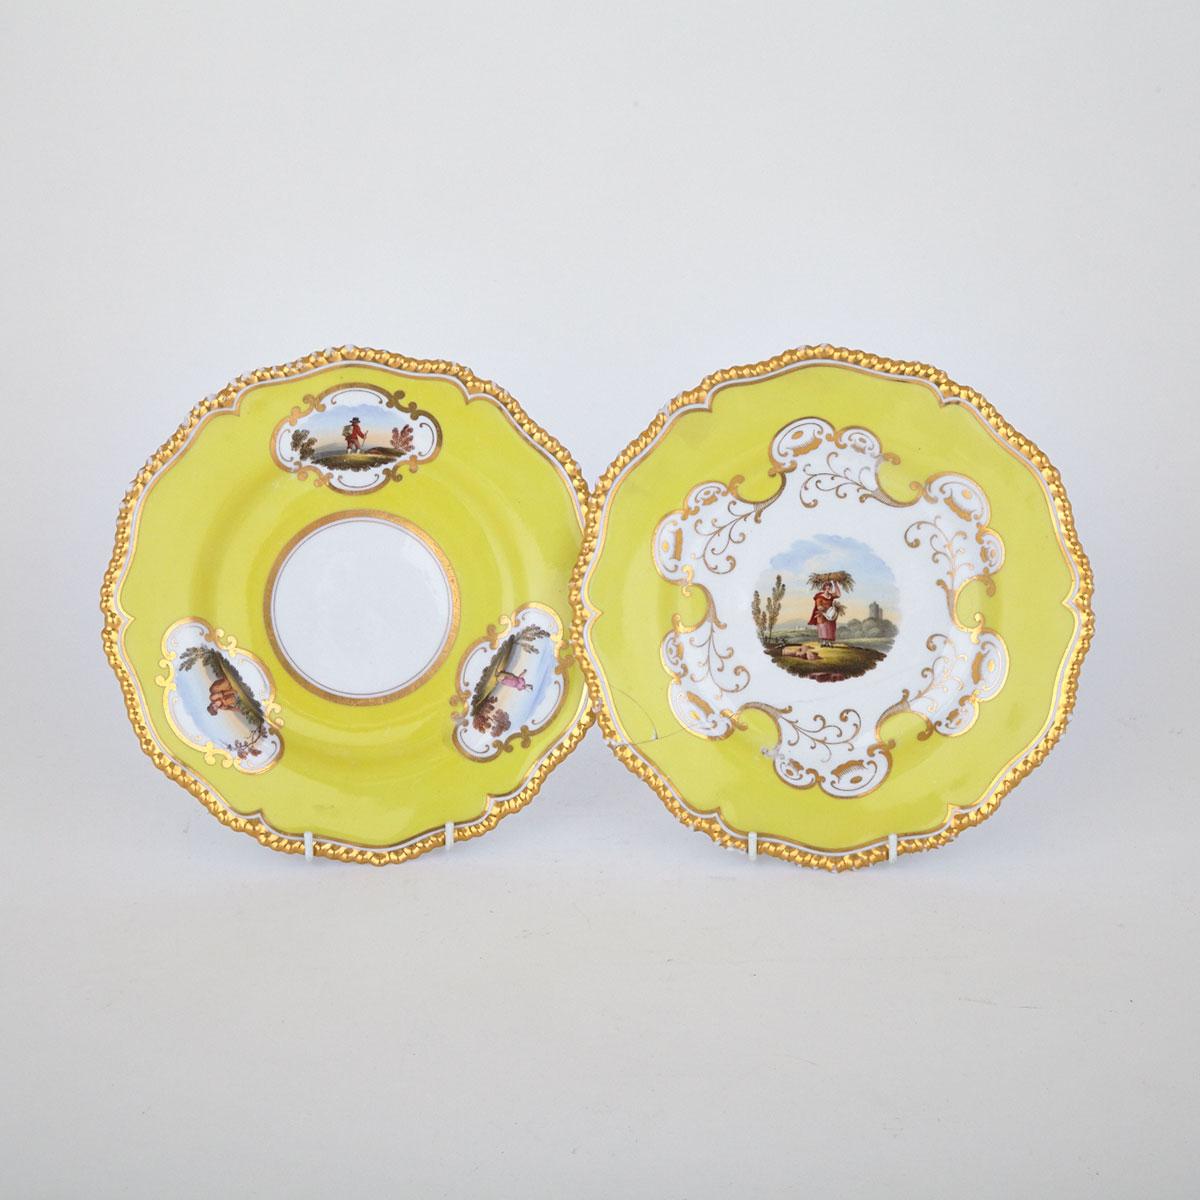 Two Flight, Barr & Barr Worcester Yellow-Ground Plates, c.1813-19